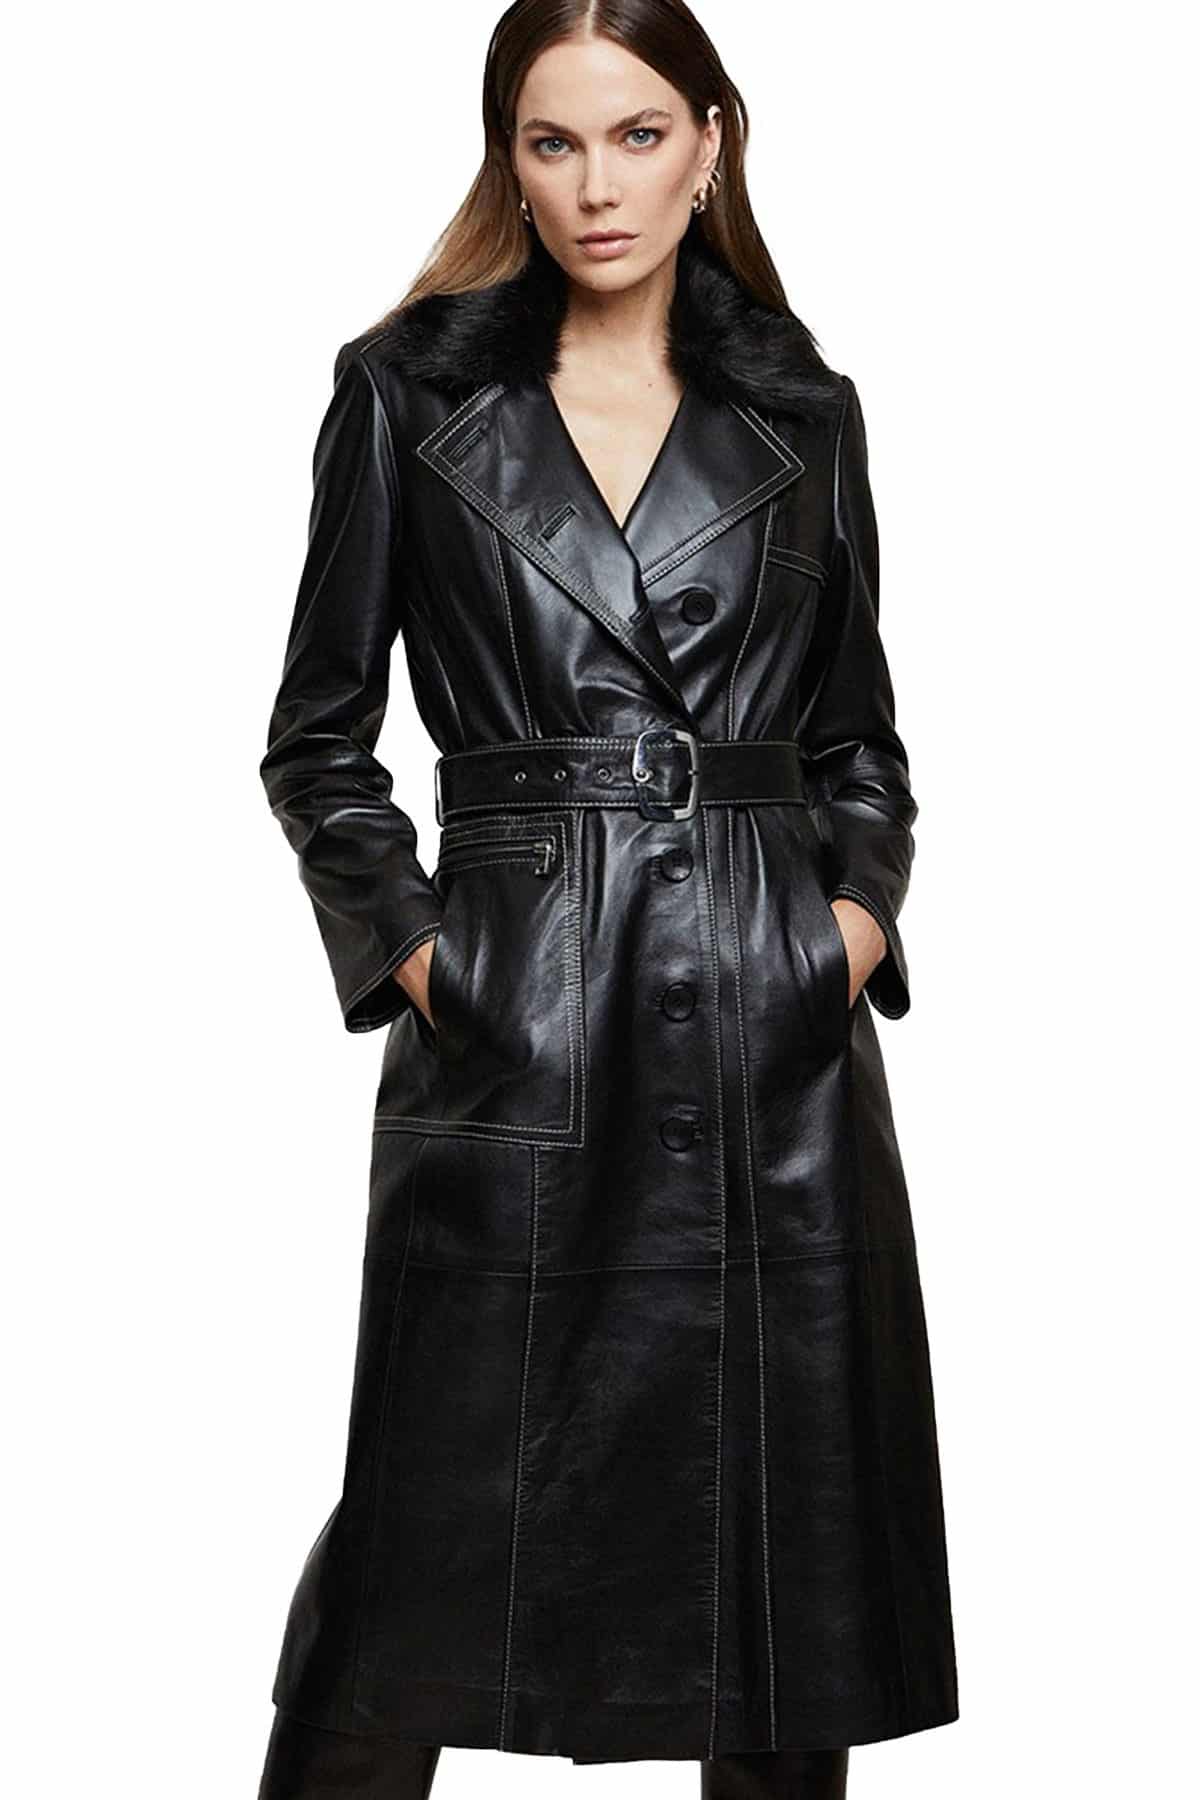 Seeking for Black Fur Collar Womens Long Trench Coat Leather?